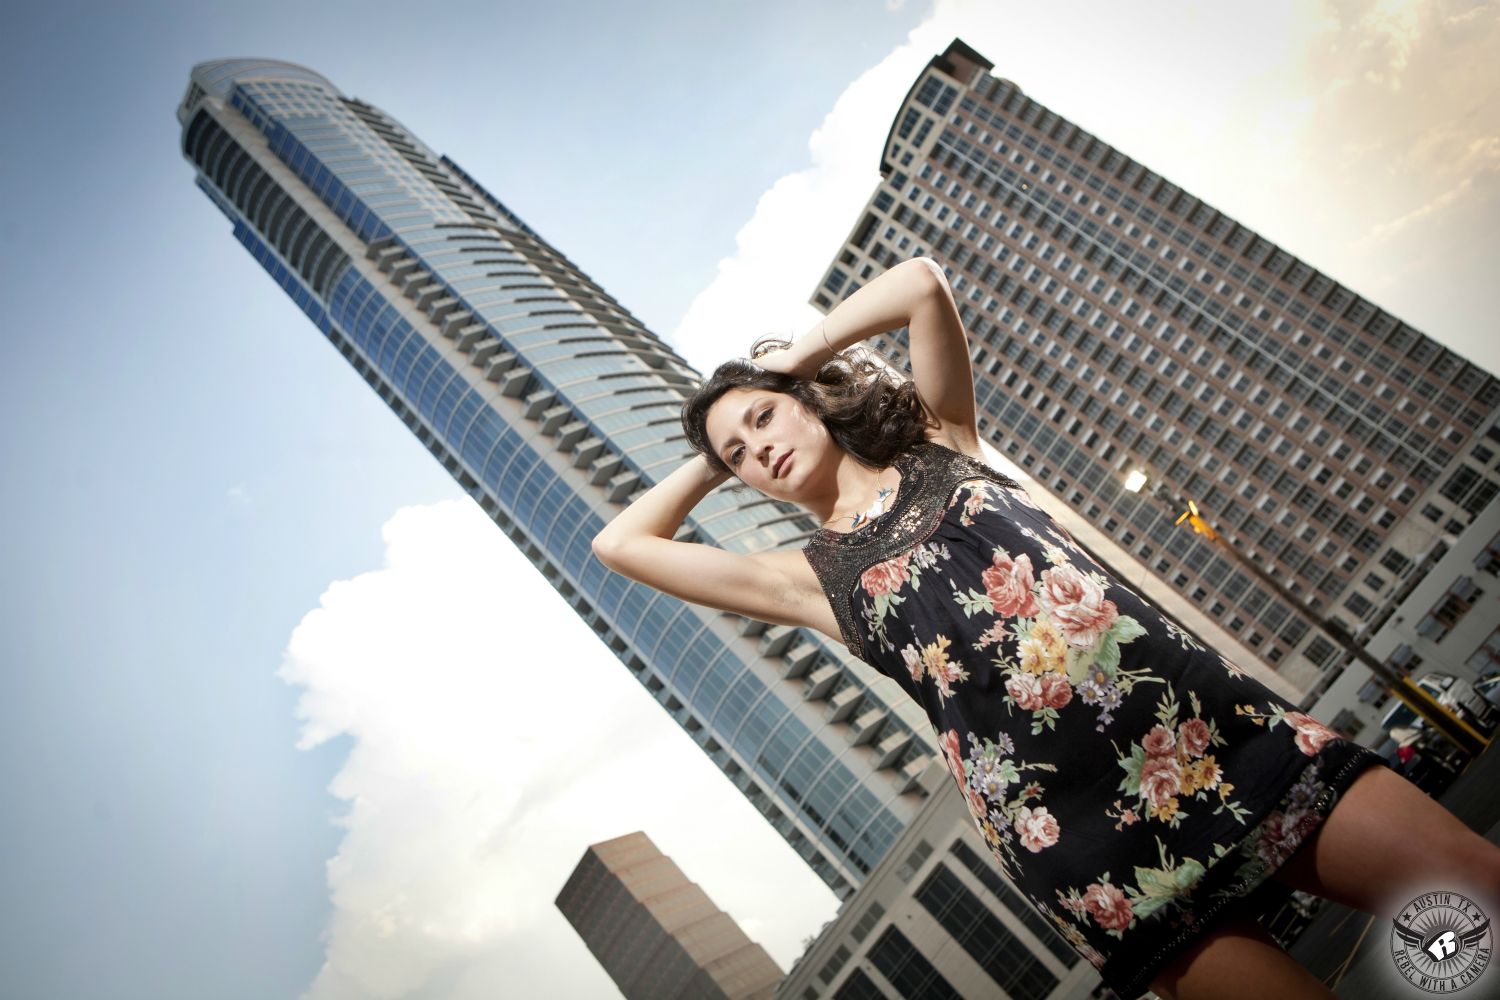 High school senior portraits Austin in downtown of girl in cute, black flowered dress with high rise buildings.